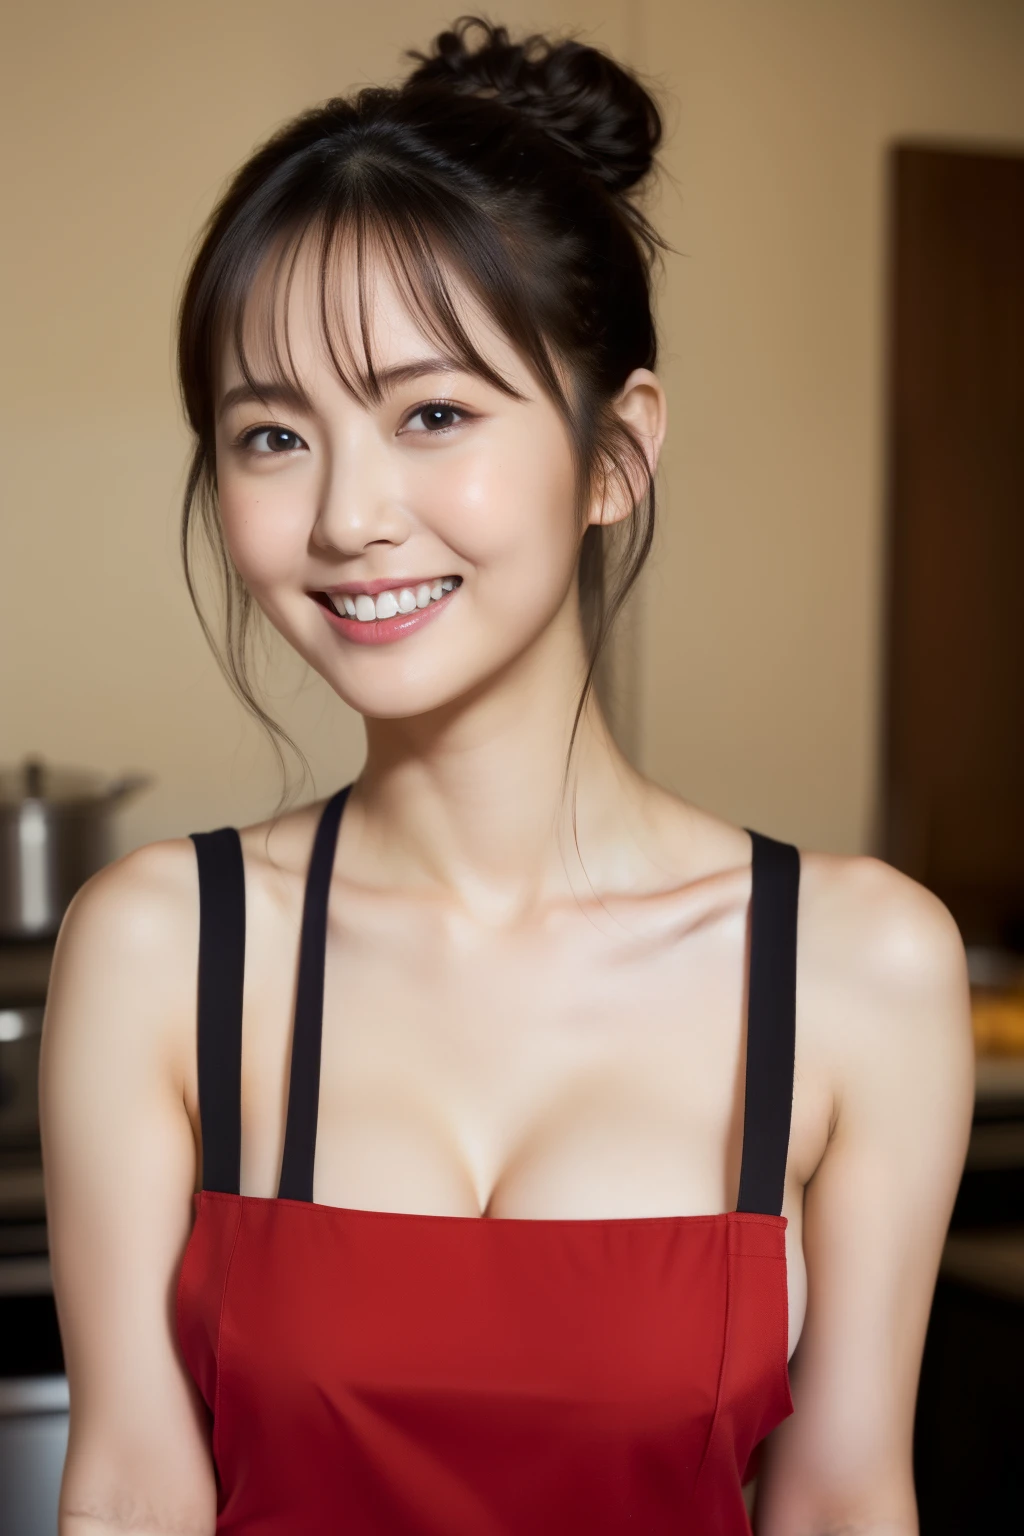 A woman is cooking, In the kitchen, Wearing a naked apron,(Naked Apron,Dark red apron,Short apron),(Hair Bun,curly,Black Hair),Medium Shot,smile,smile,Big round box,(cover-),Slim figure, Sweaty skin,(mole,pores),Realistic,Realistic:1.37, Tabletop, highest quality,Hmph,Highly detailed skin,Detailed face,Amazing eye for detail,Beautiful and delicate,Detailed clothing,High resolution photos,Professional Light,Cinema Lighting, Cleavage、　Thighs、　
